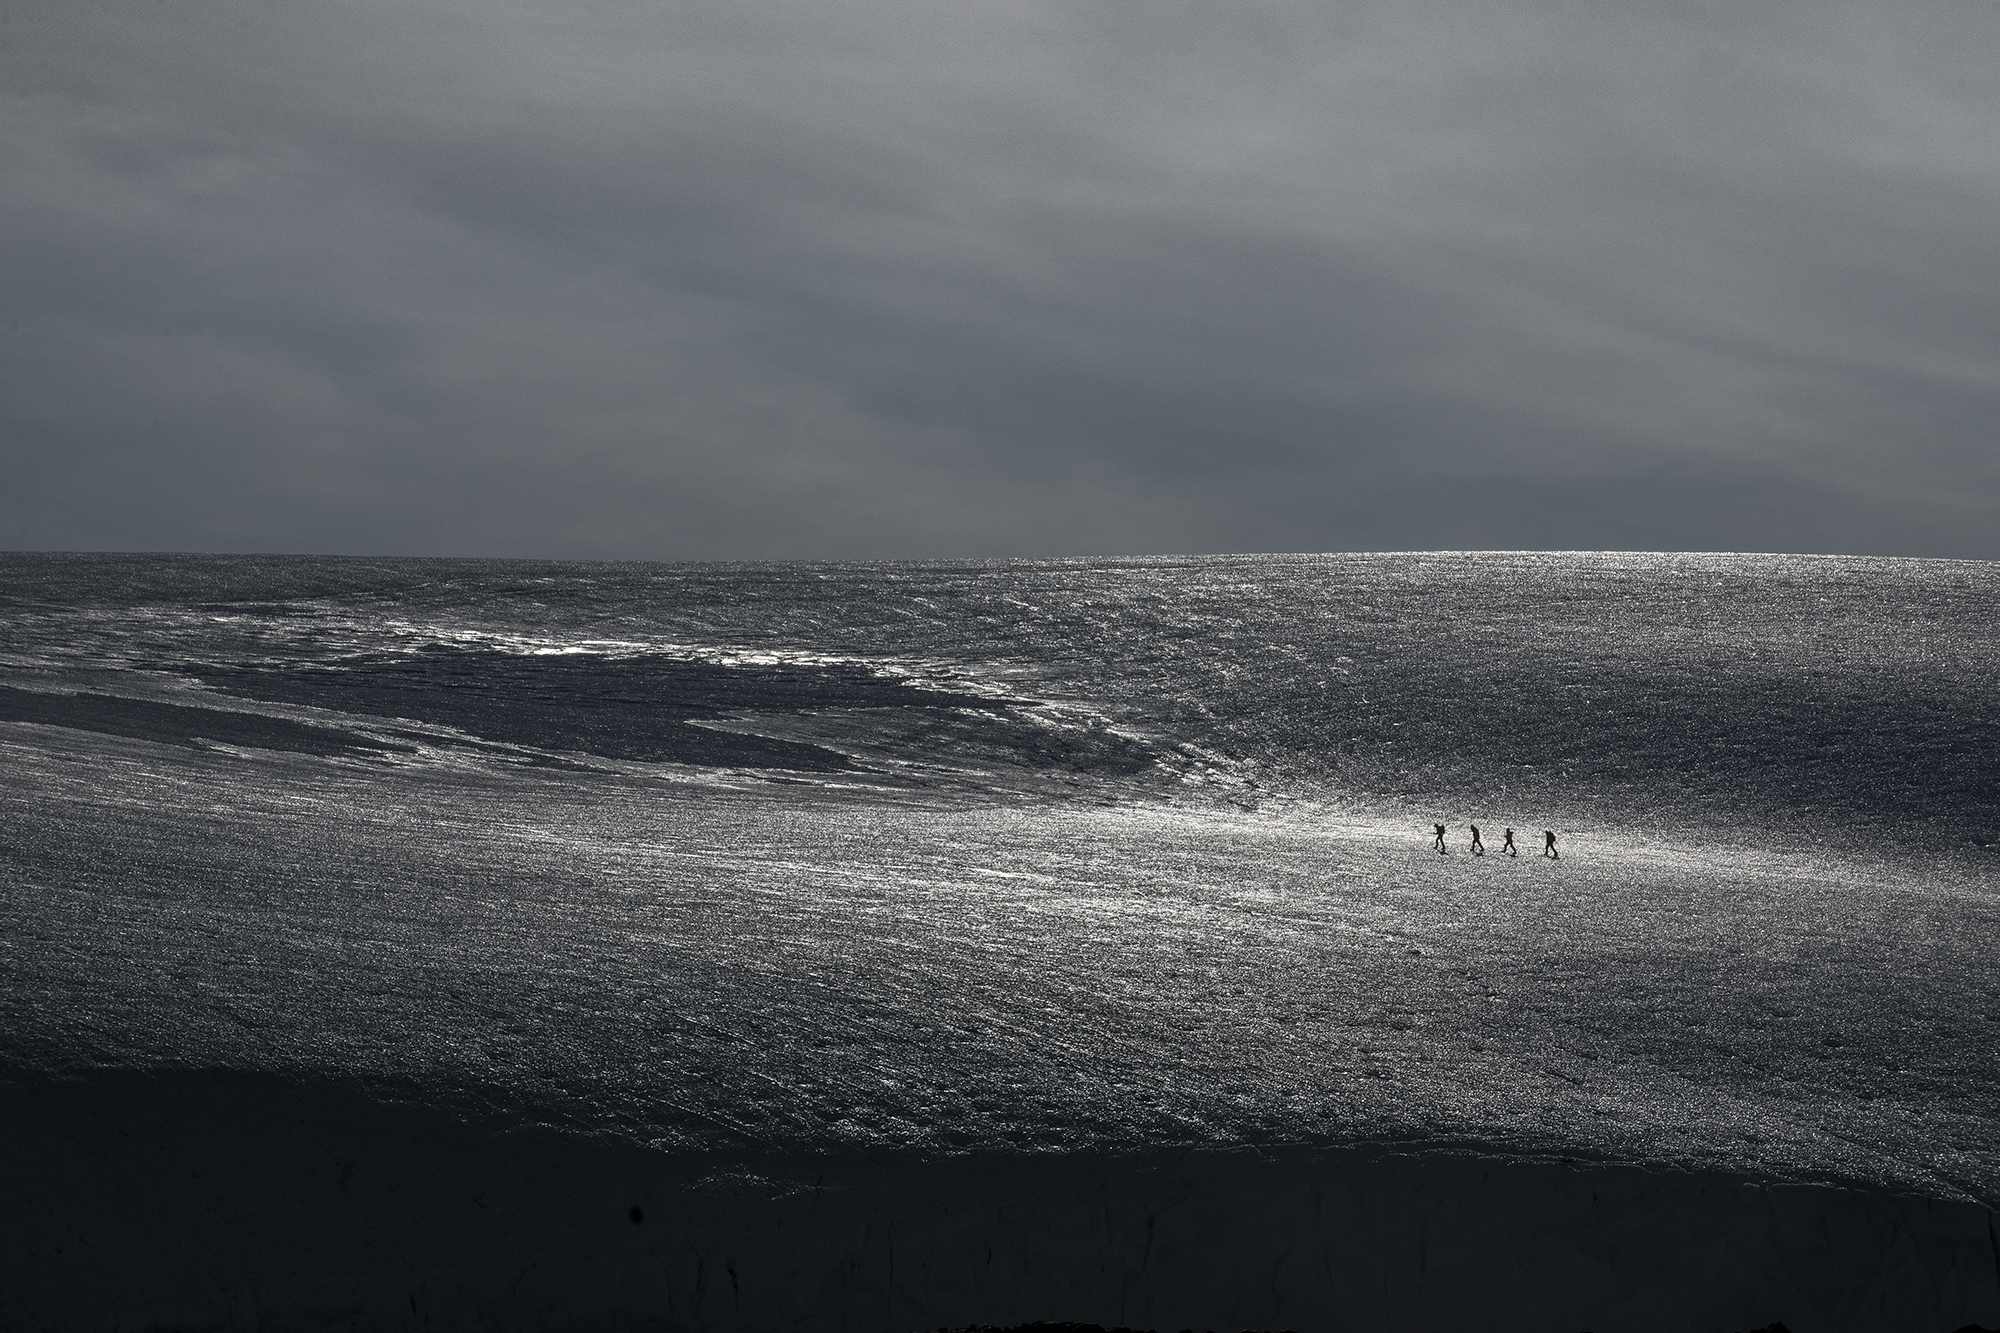 A group of tourists walk across an ice field in Antarctica, 2013, Martin Hartley